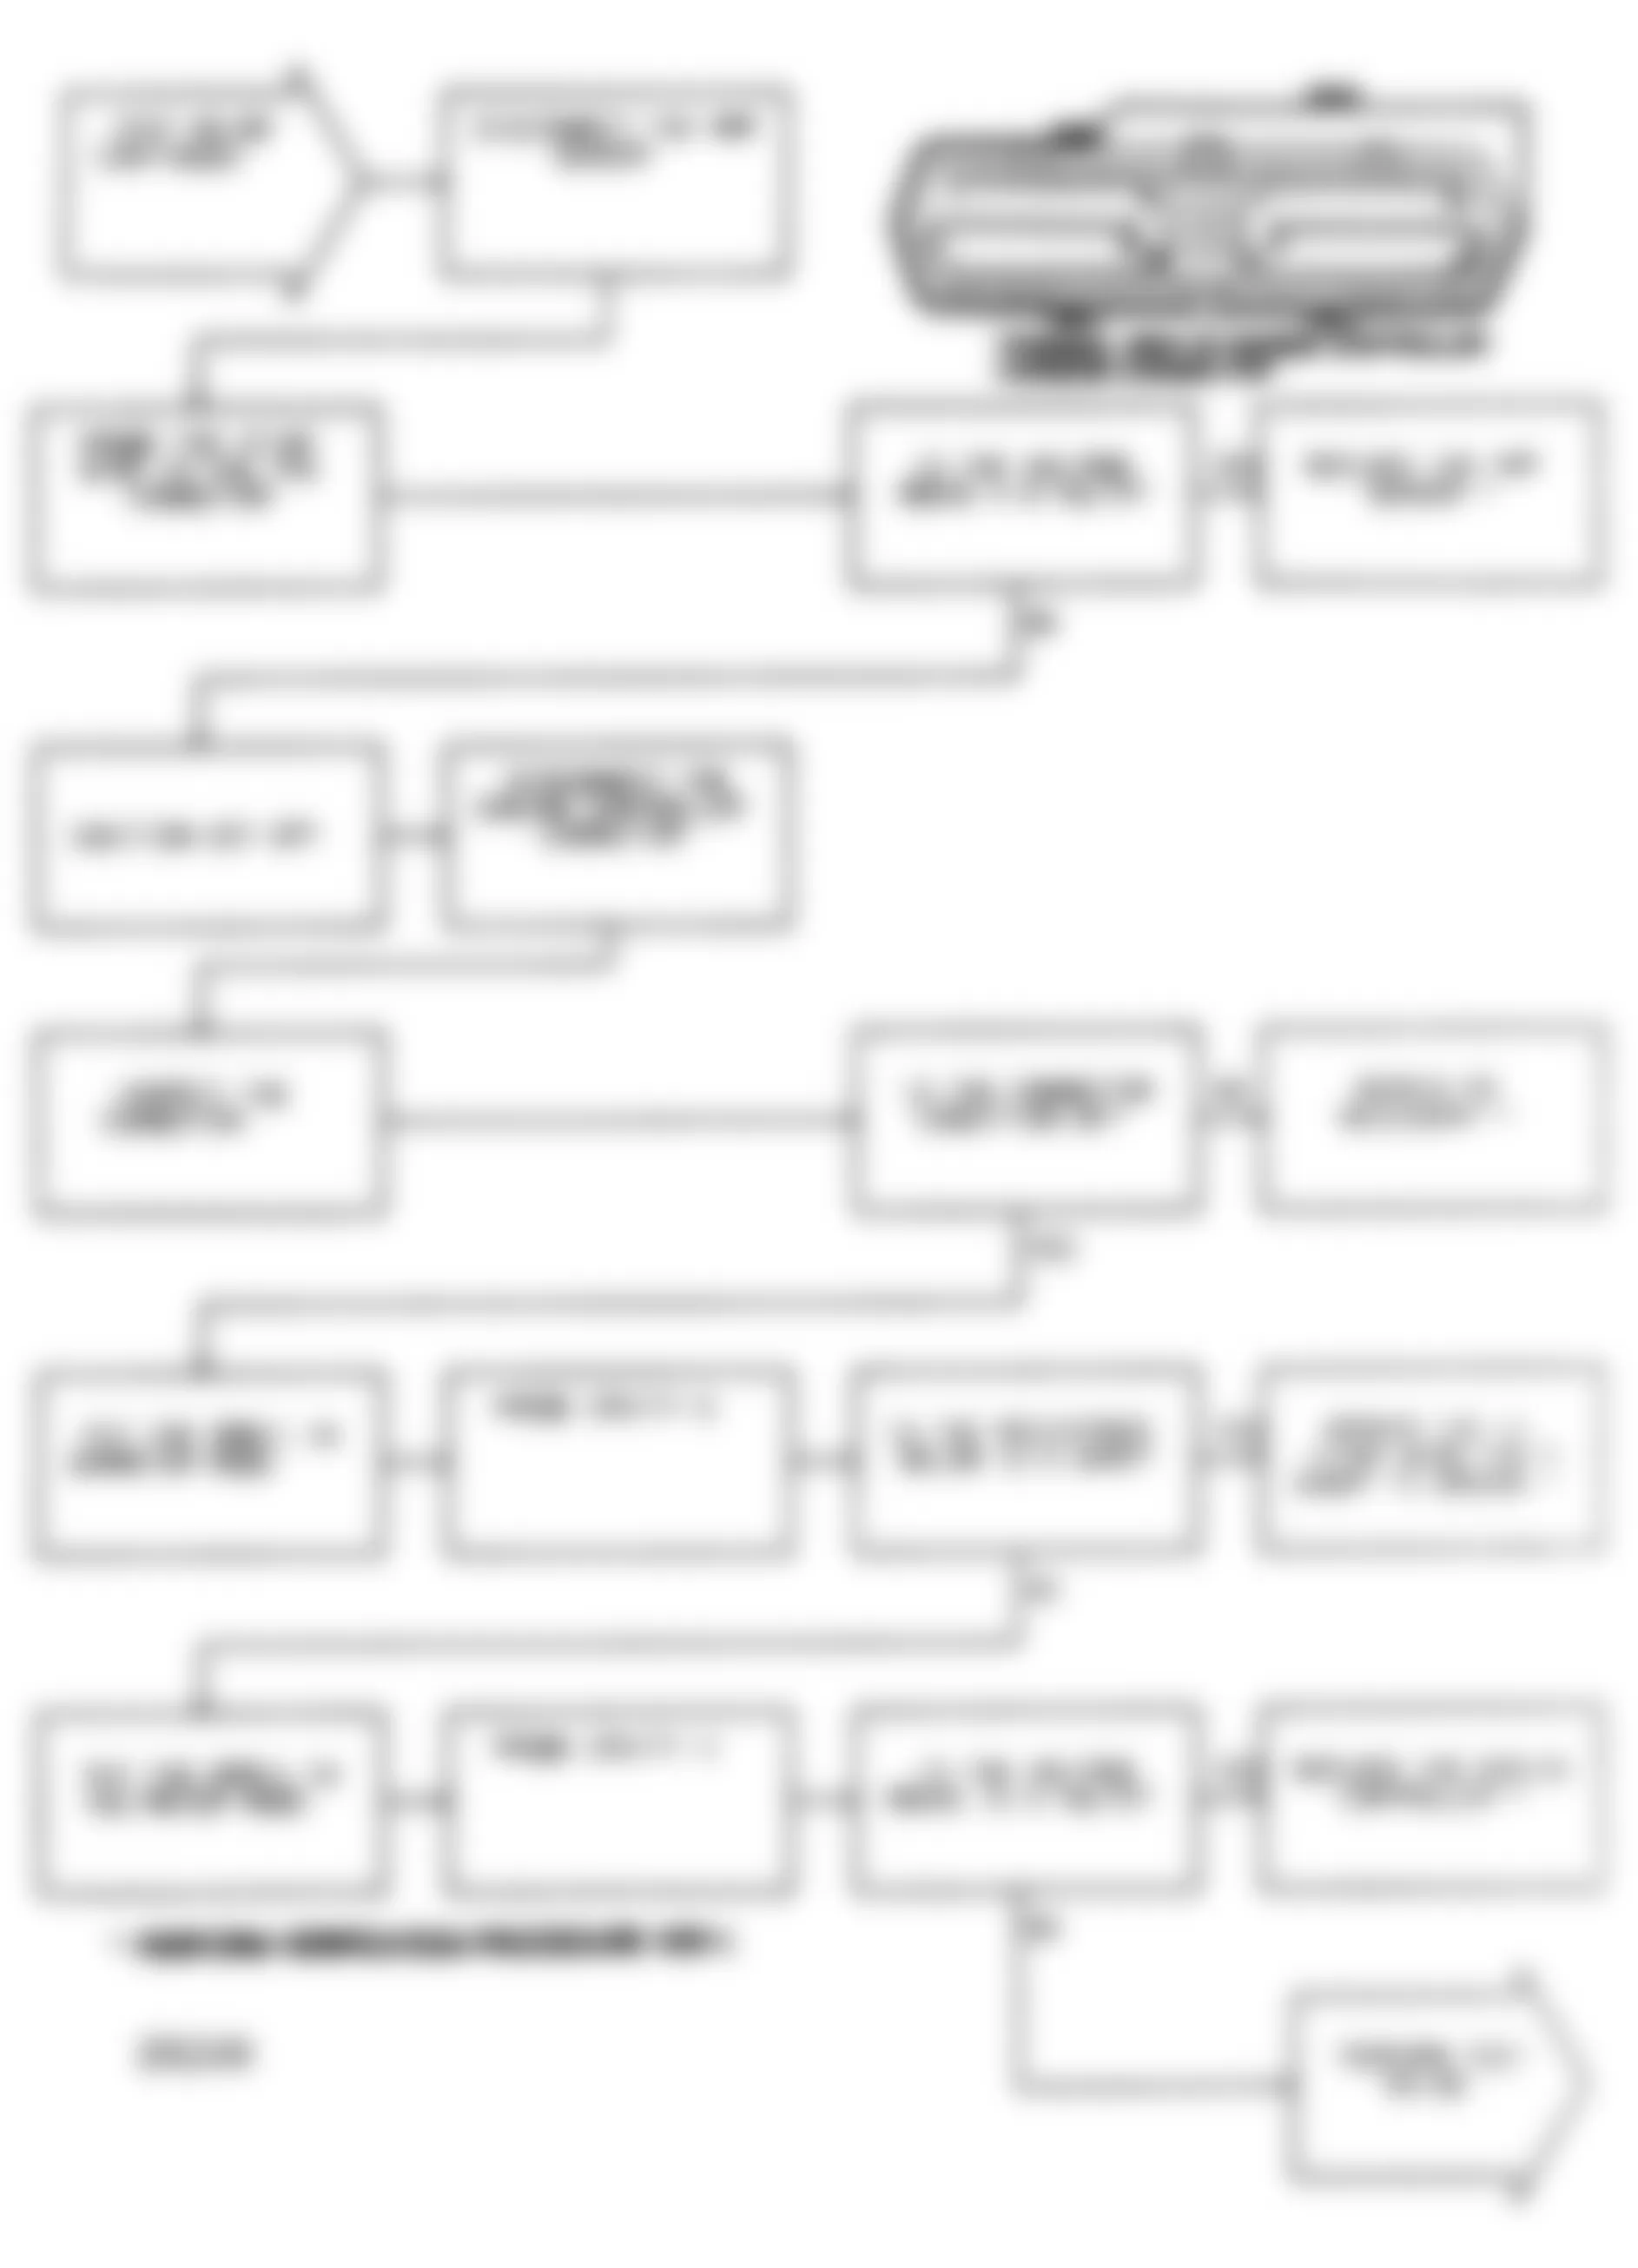 Chrysler LeBaron 1991 - Component Locations -  Test NS-8A, Diagnostic Flow Chart (3 of 3)